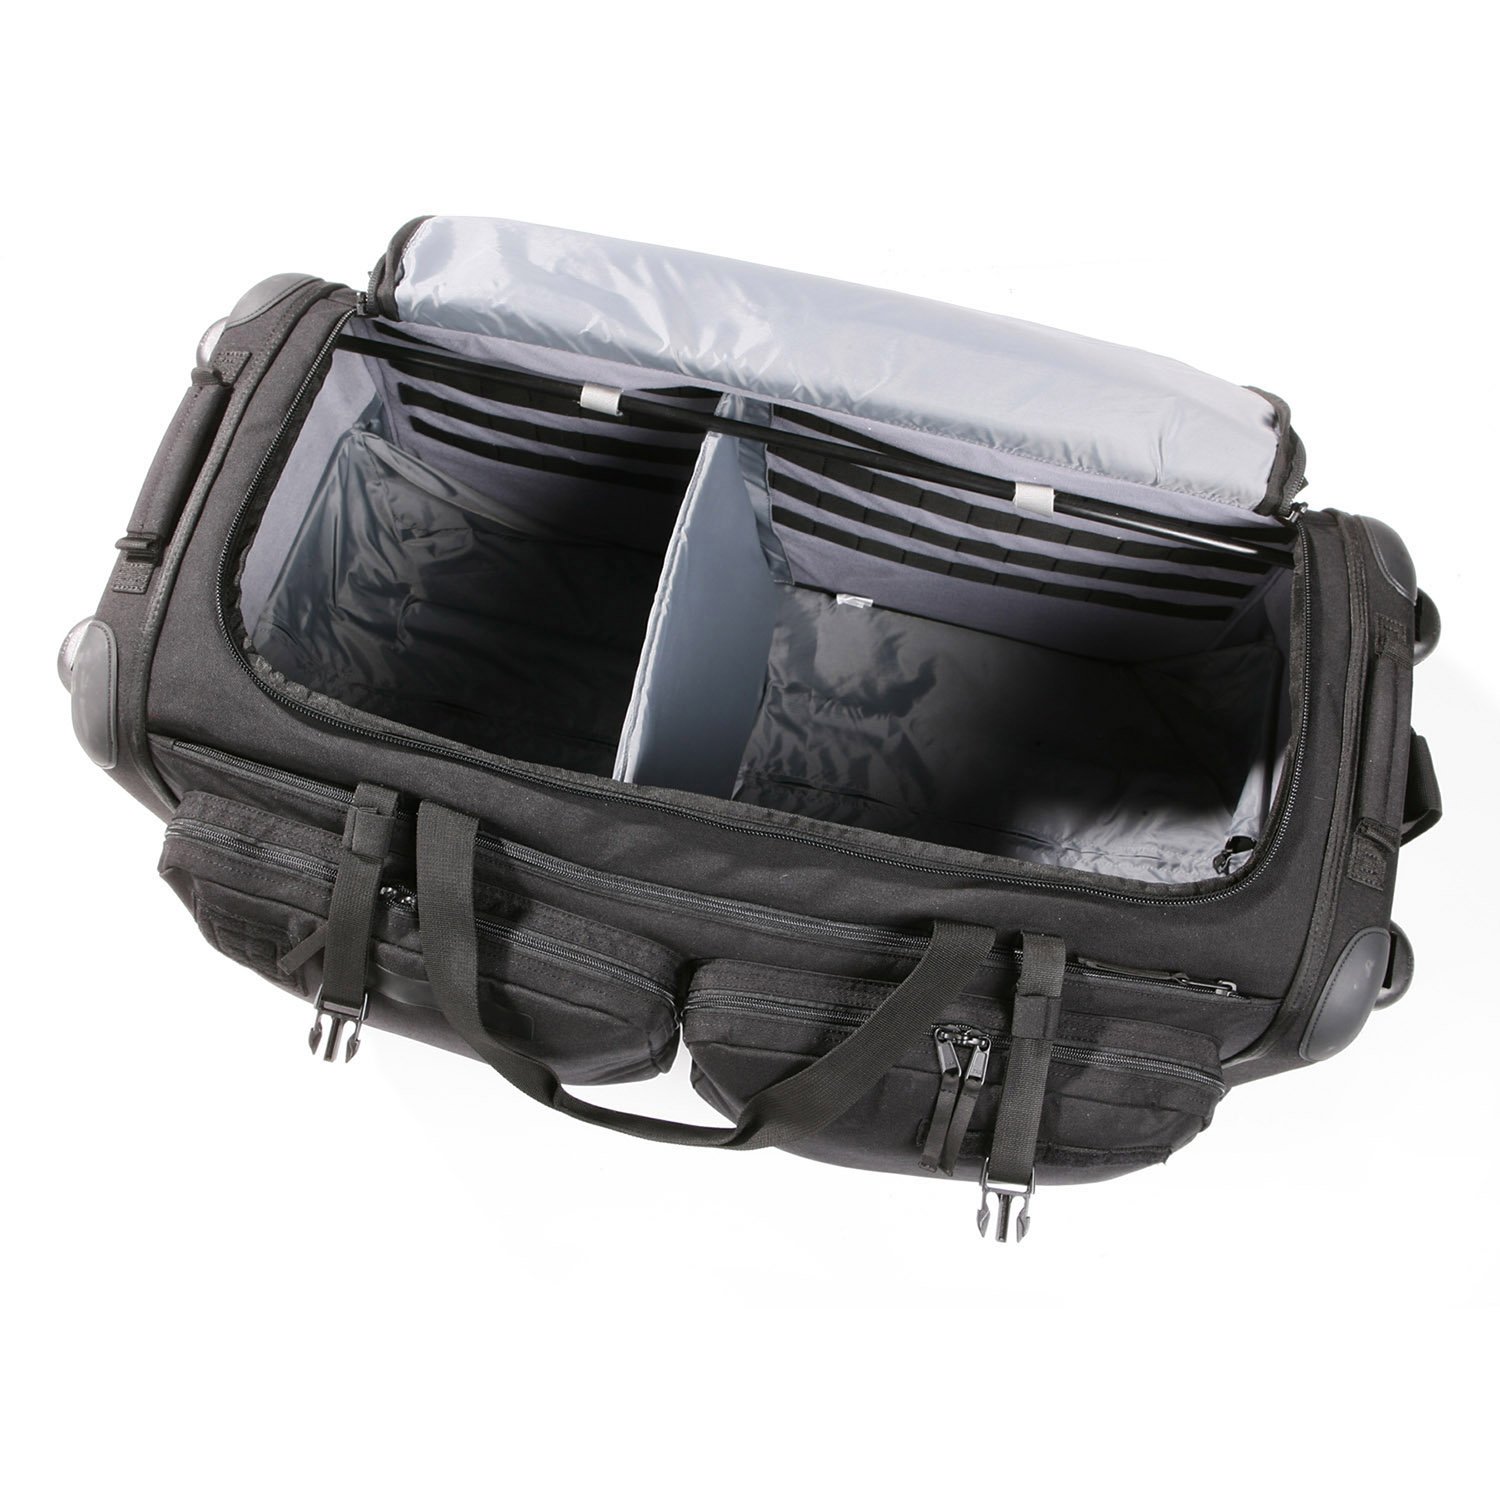 5.11 Tactical Mission Ready 2.0 Rolling Bag